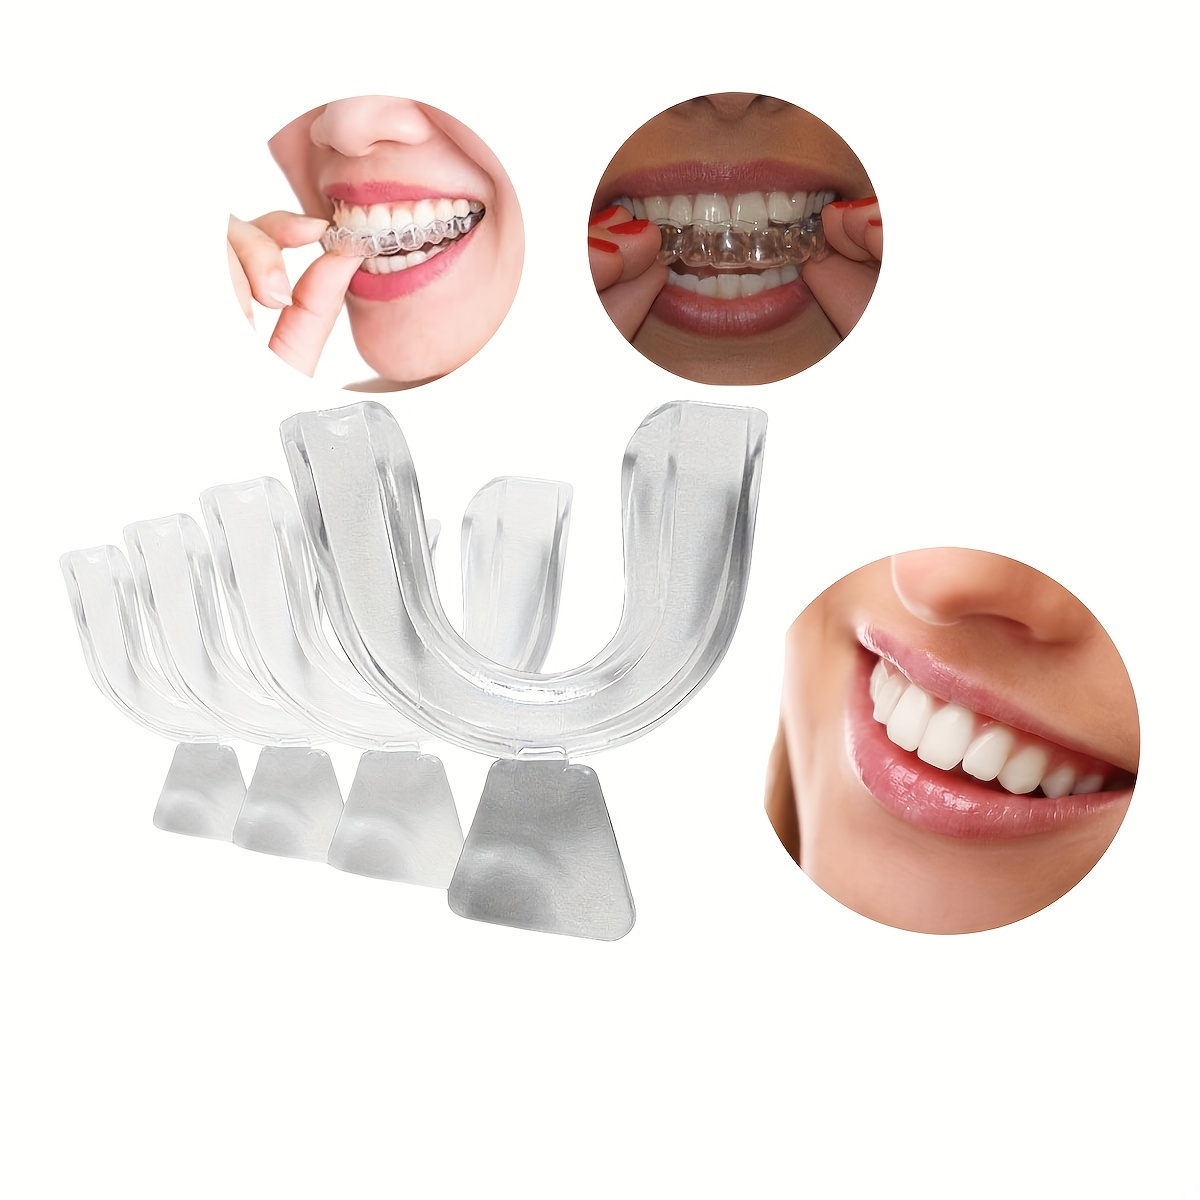 

4pcs/set Multi-sport Mouth Guard - Durable Plastic Teeth Protectors For Boxing, Mma, Rugby, Football, Basketball - Nighttime Dental Guards For Teeth Grinding Protection